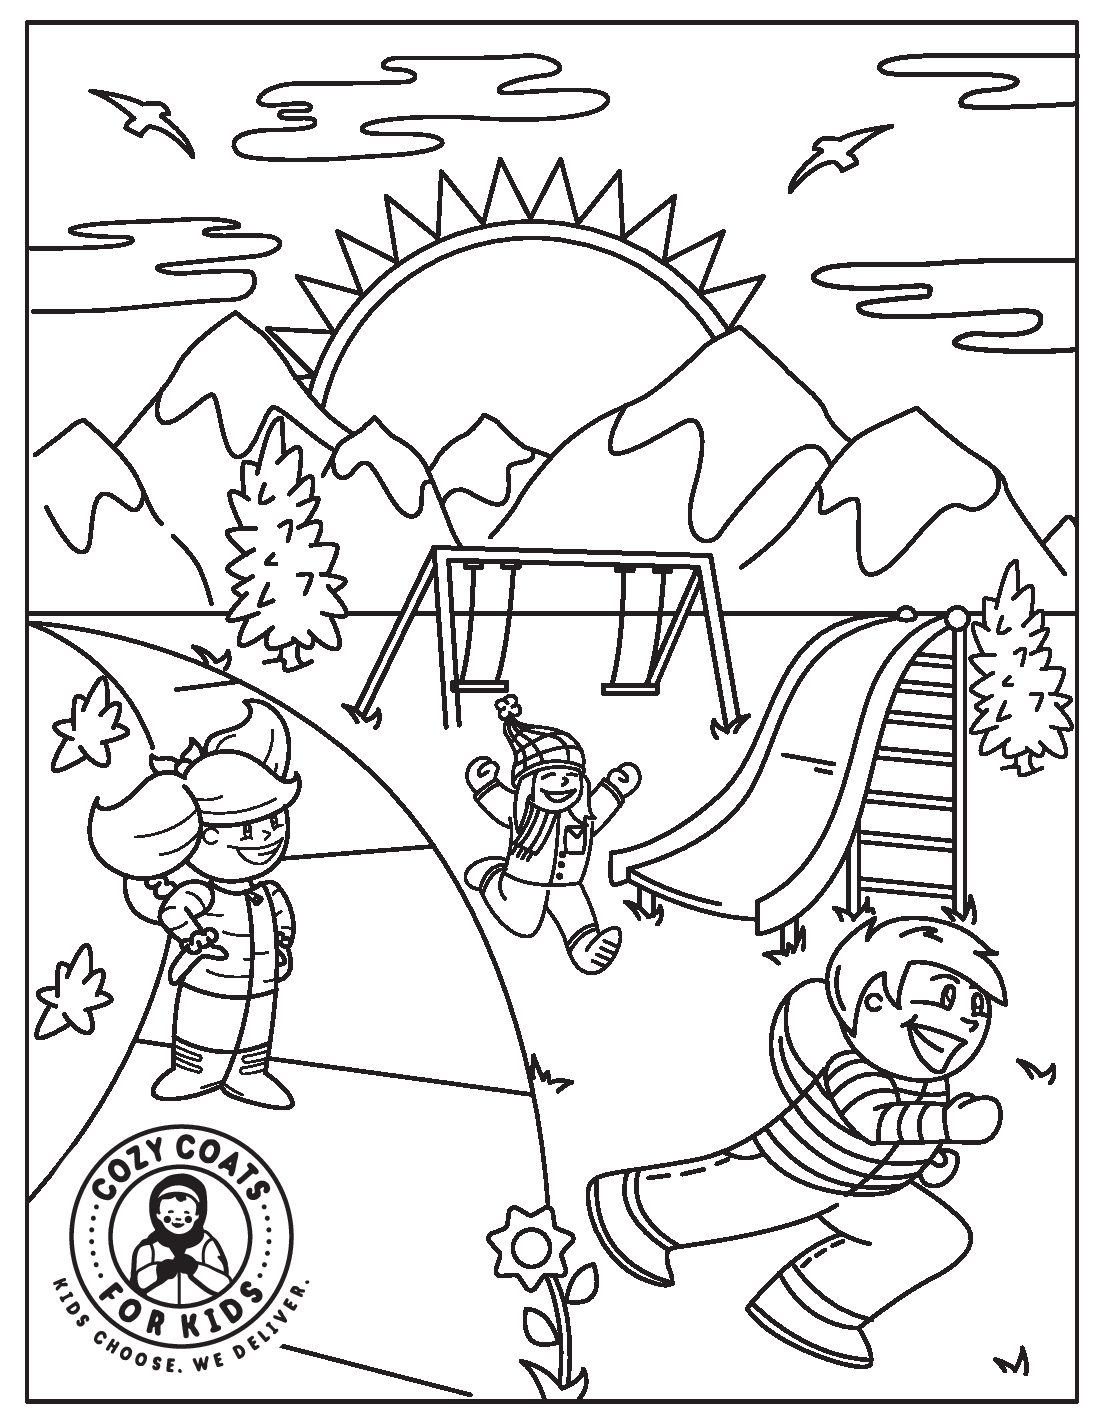 Free downloadable coloring sheet for children